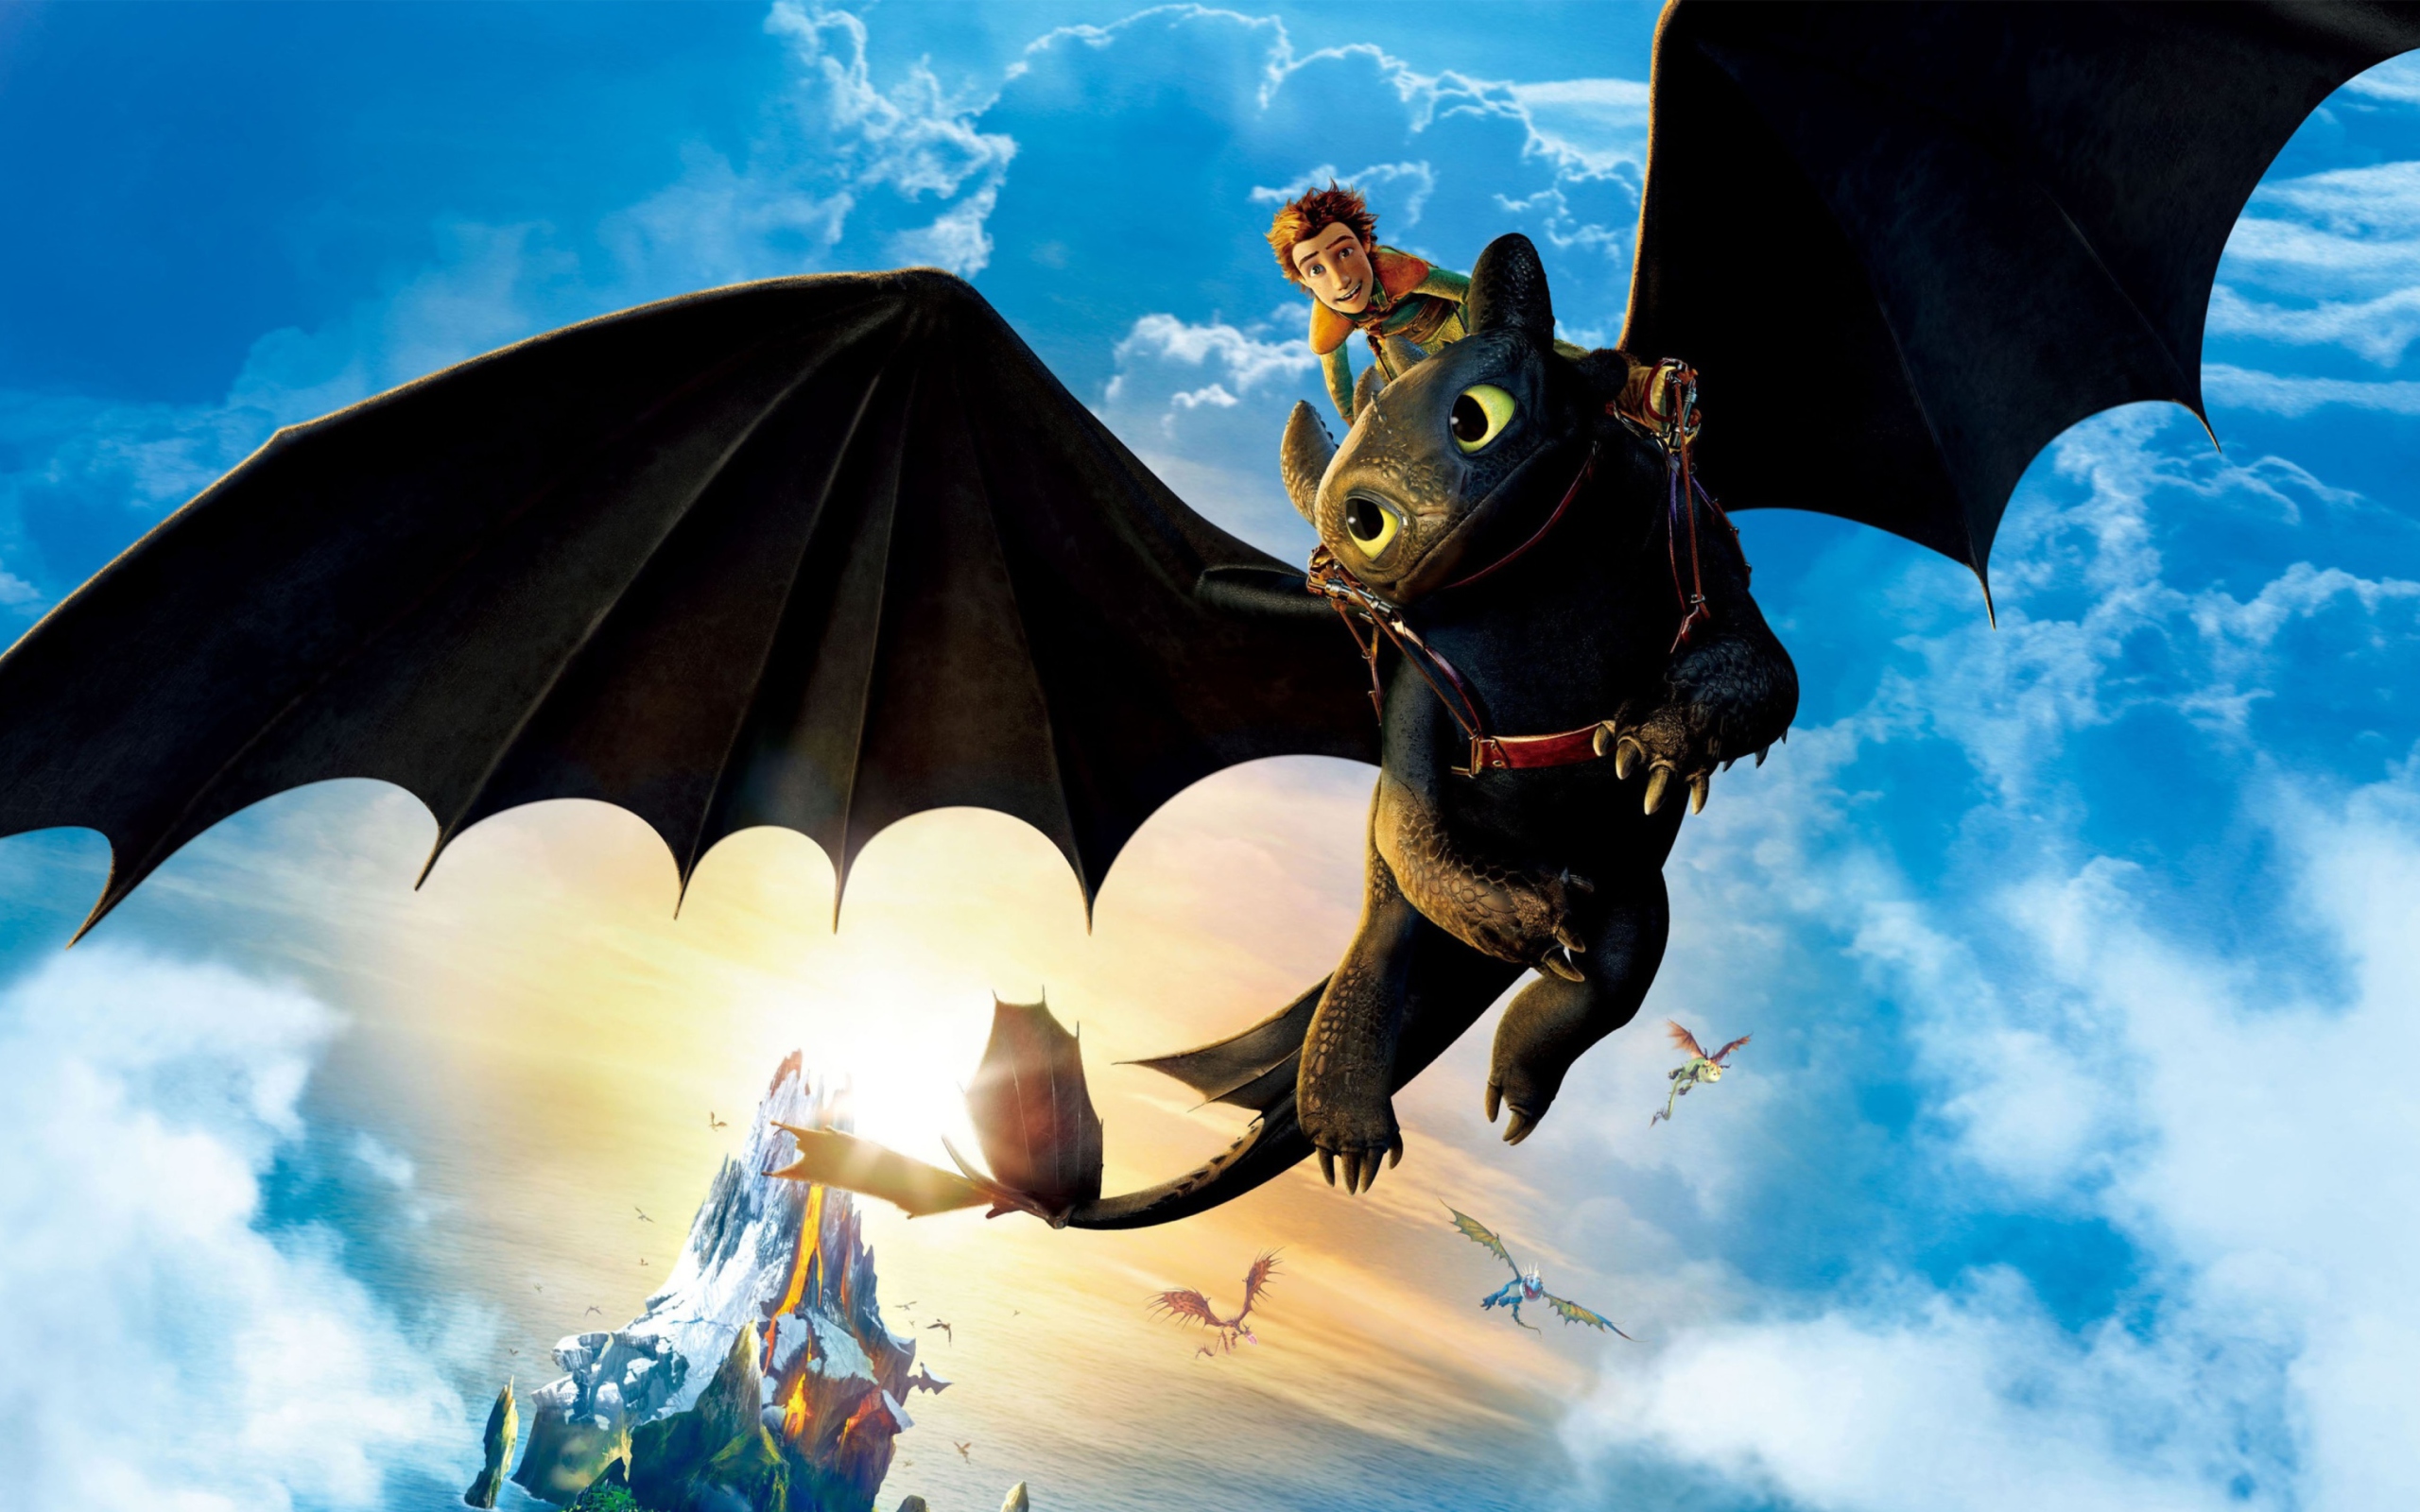 Das Hiccup Riding Toothless Wallpaper 2560x1600